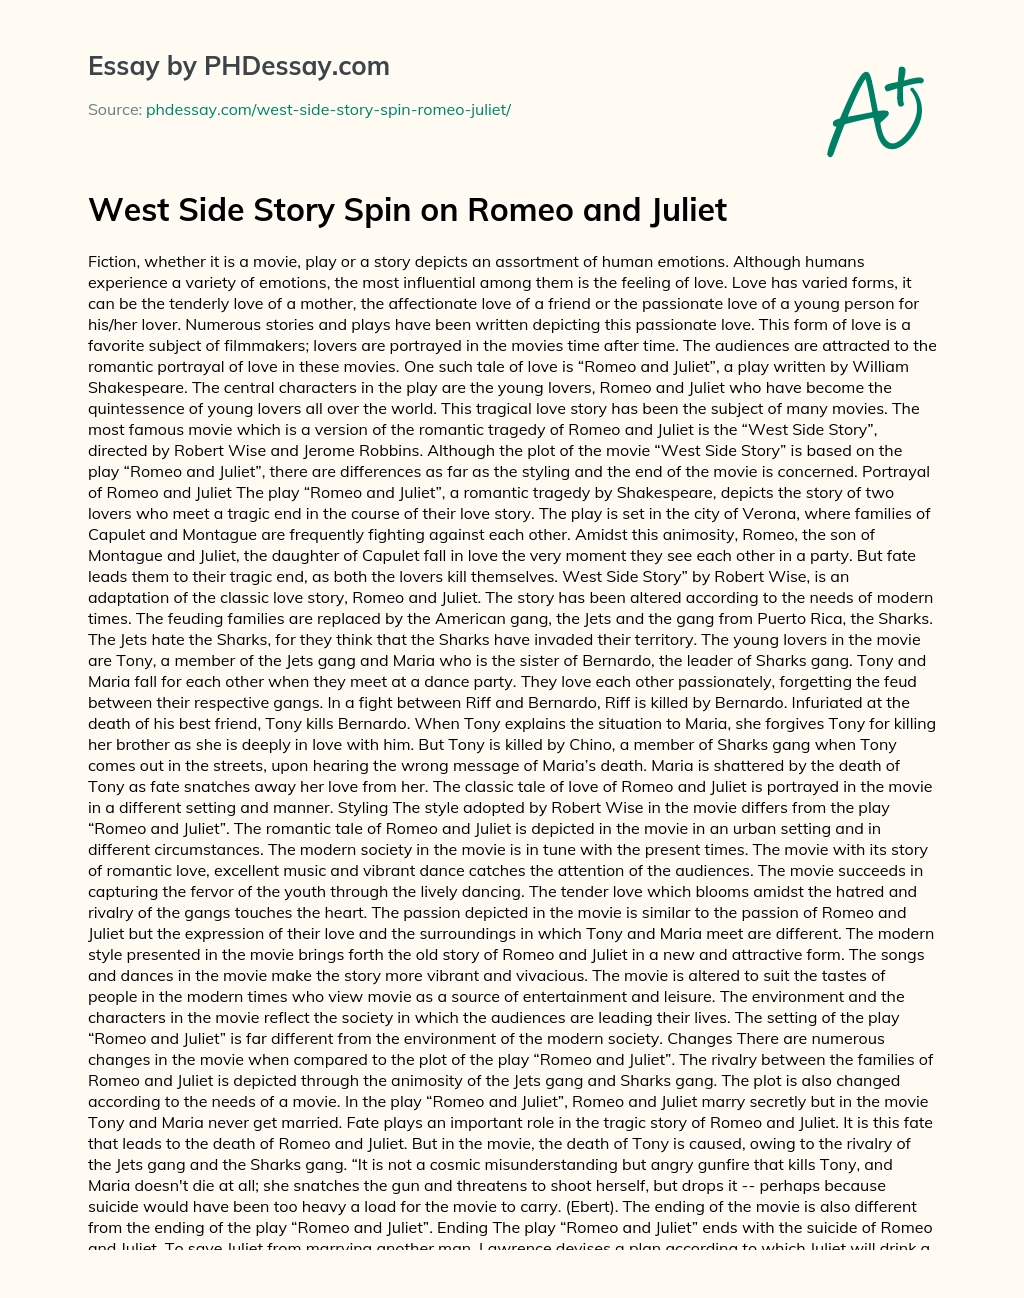 West Side Story Spin on Romeo and Juliet essay